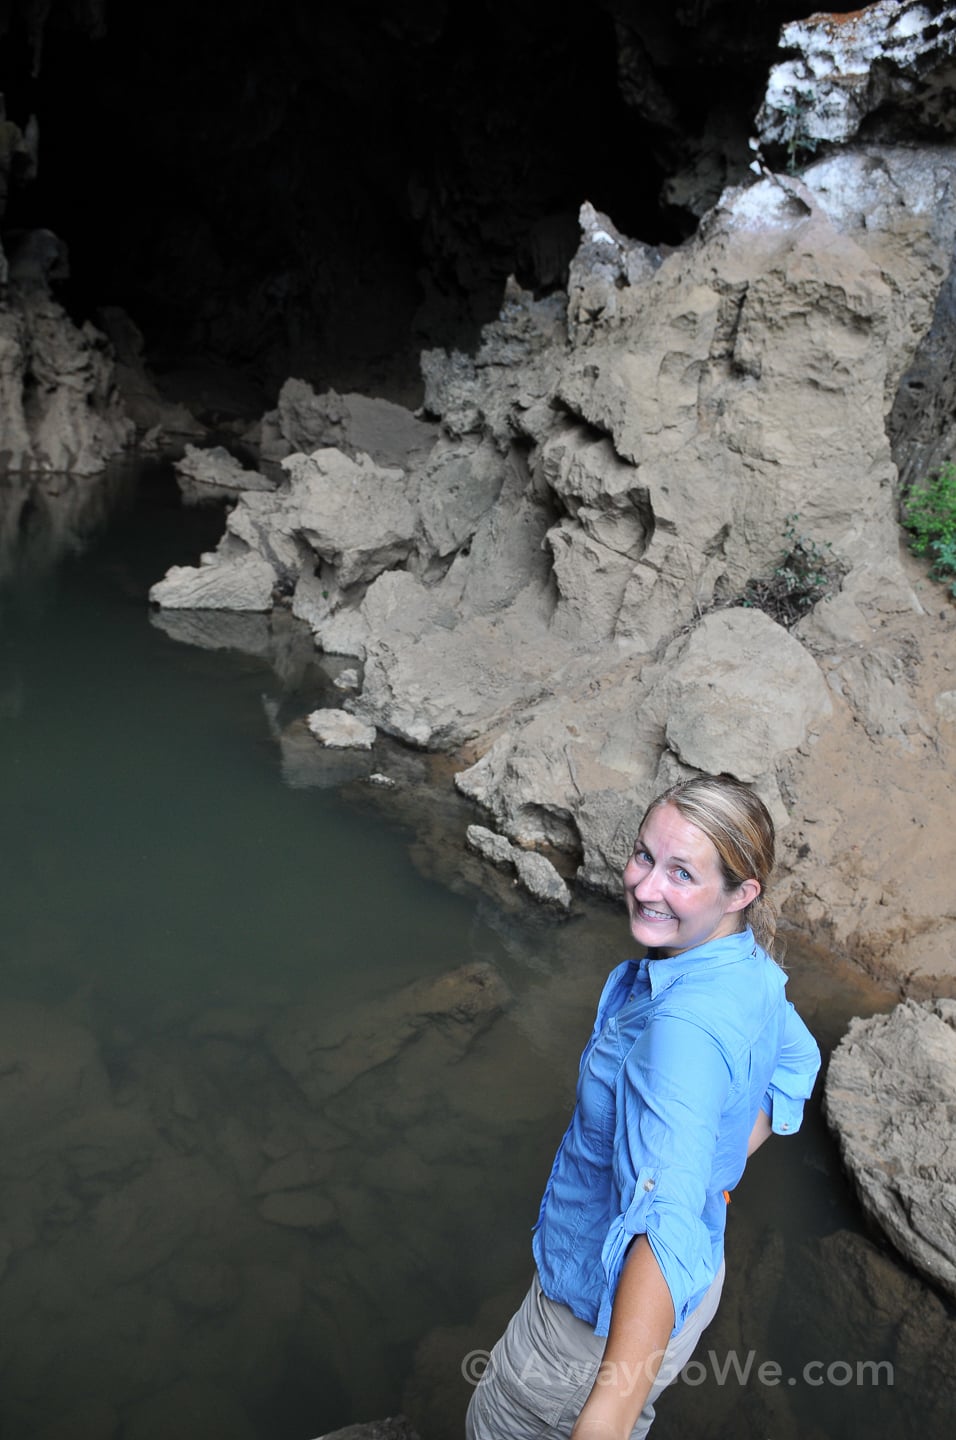 woman standing near water-filled cave in laos